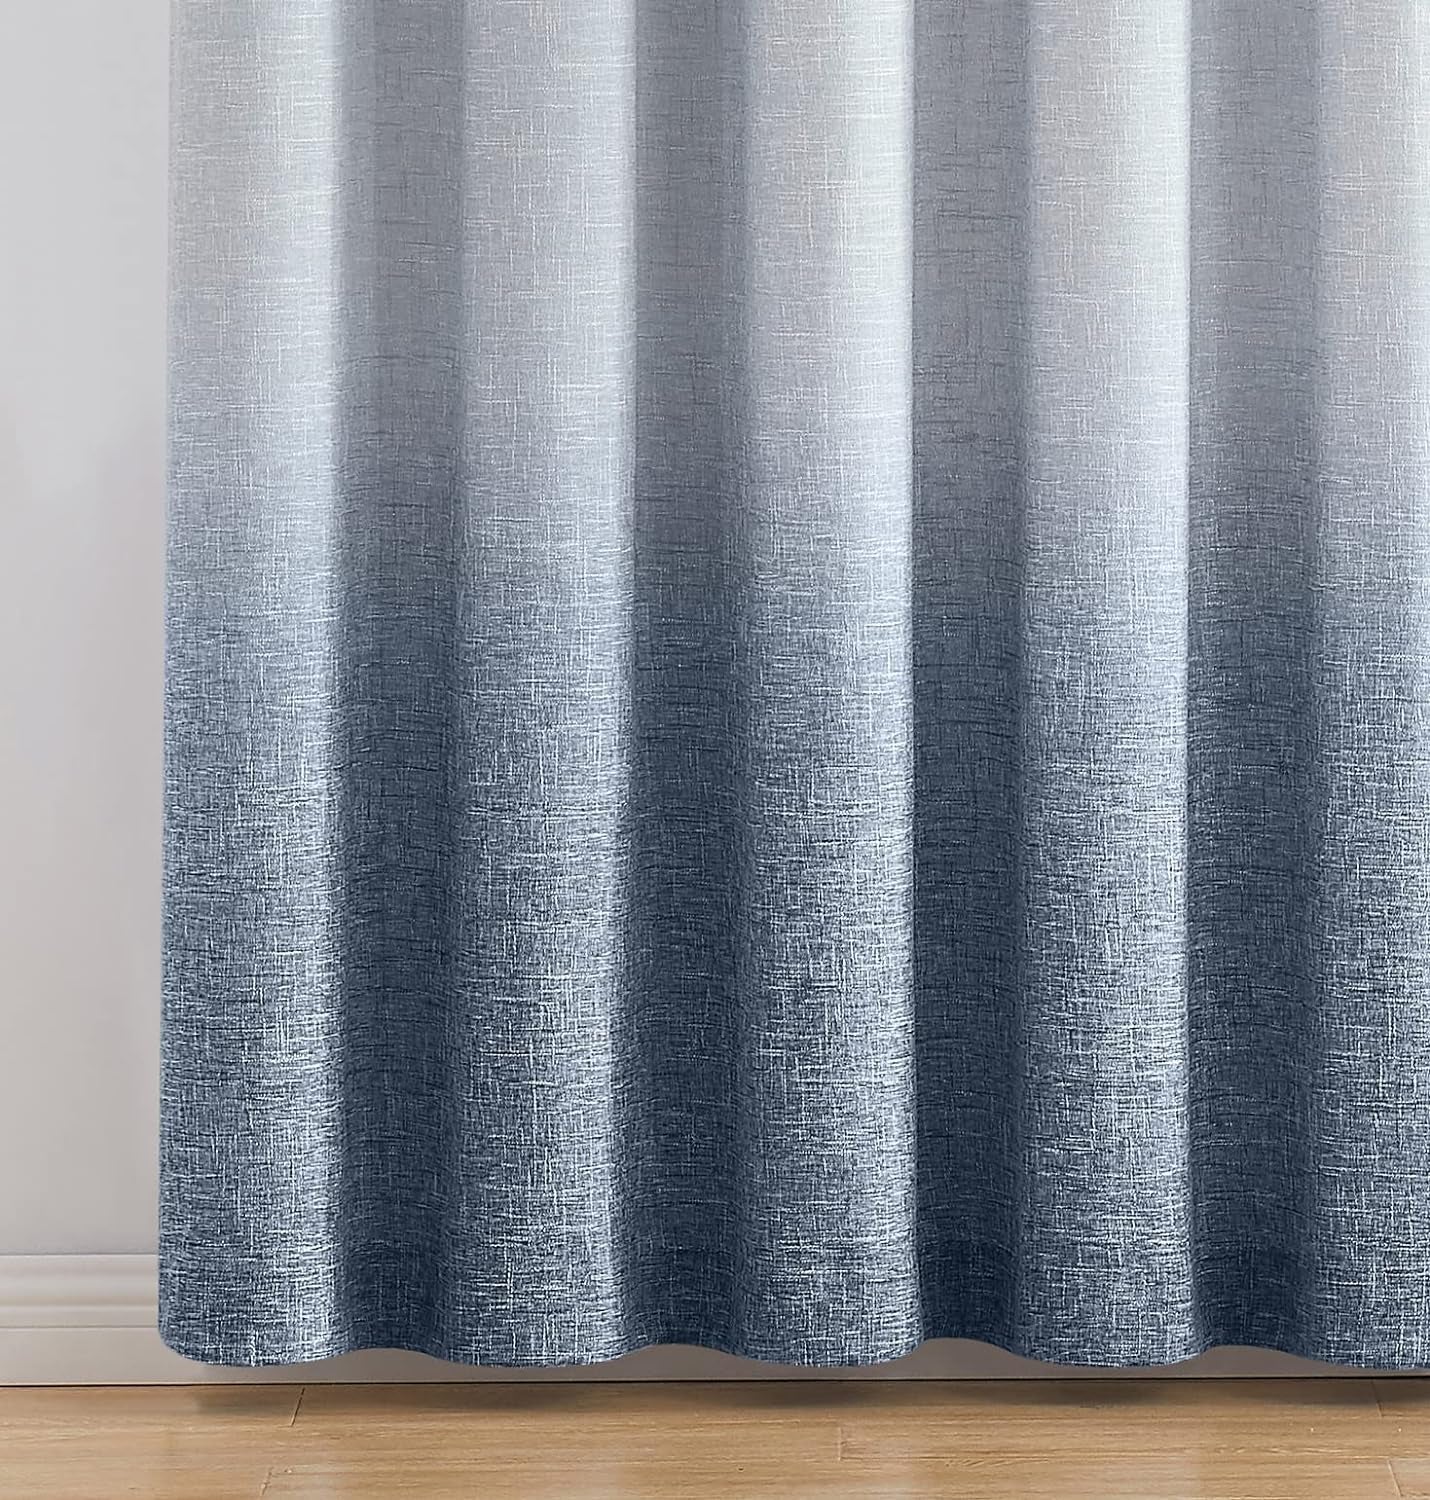 Central Park Ombre Pinch Pleat Curtain Panels Rayon Blend Textured Semi Sheer Window Treatment Drape with Backtab for Living Room Bedroom, Cream White to Indigo Blue, 40" Wx84 L, 2 Panels  Central Park   